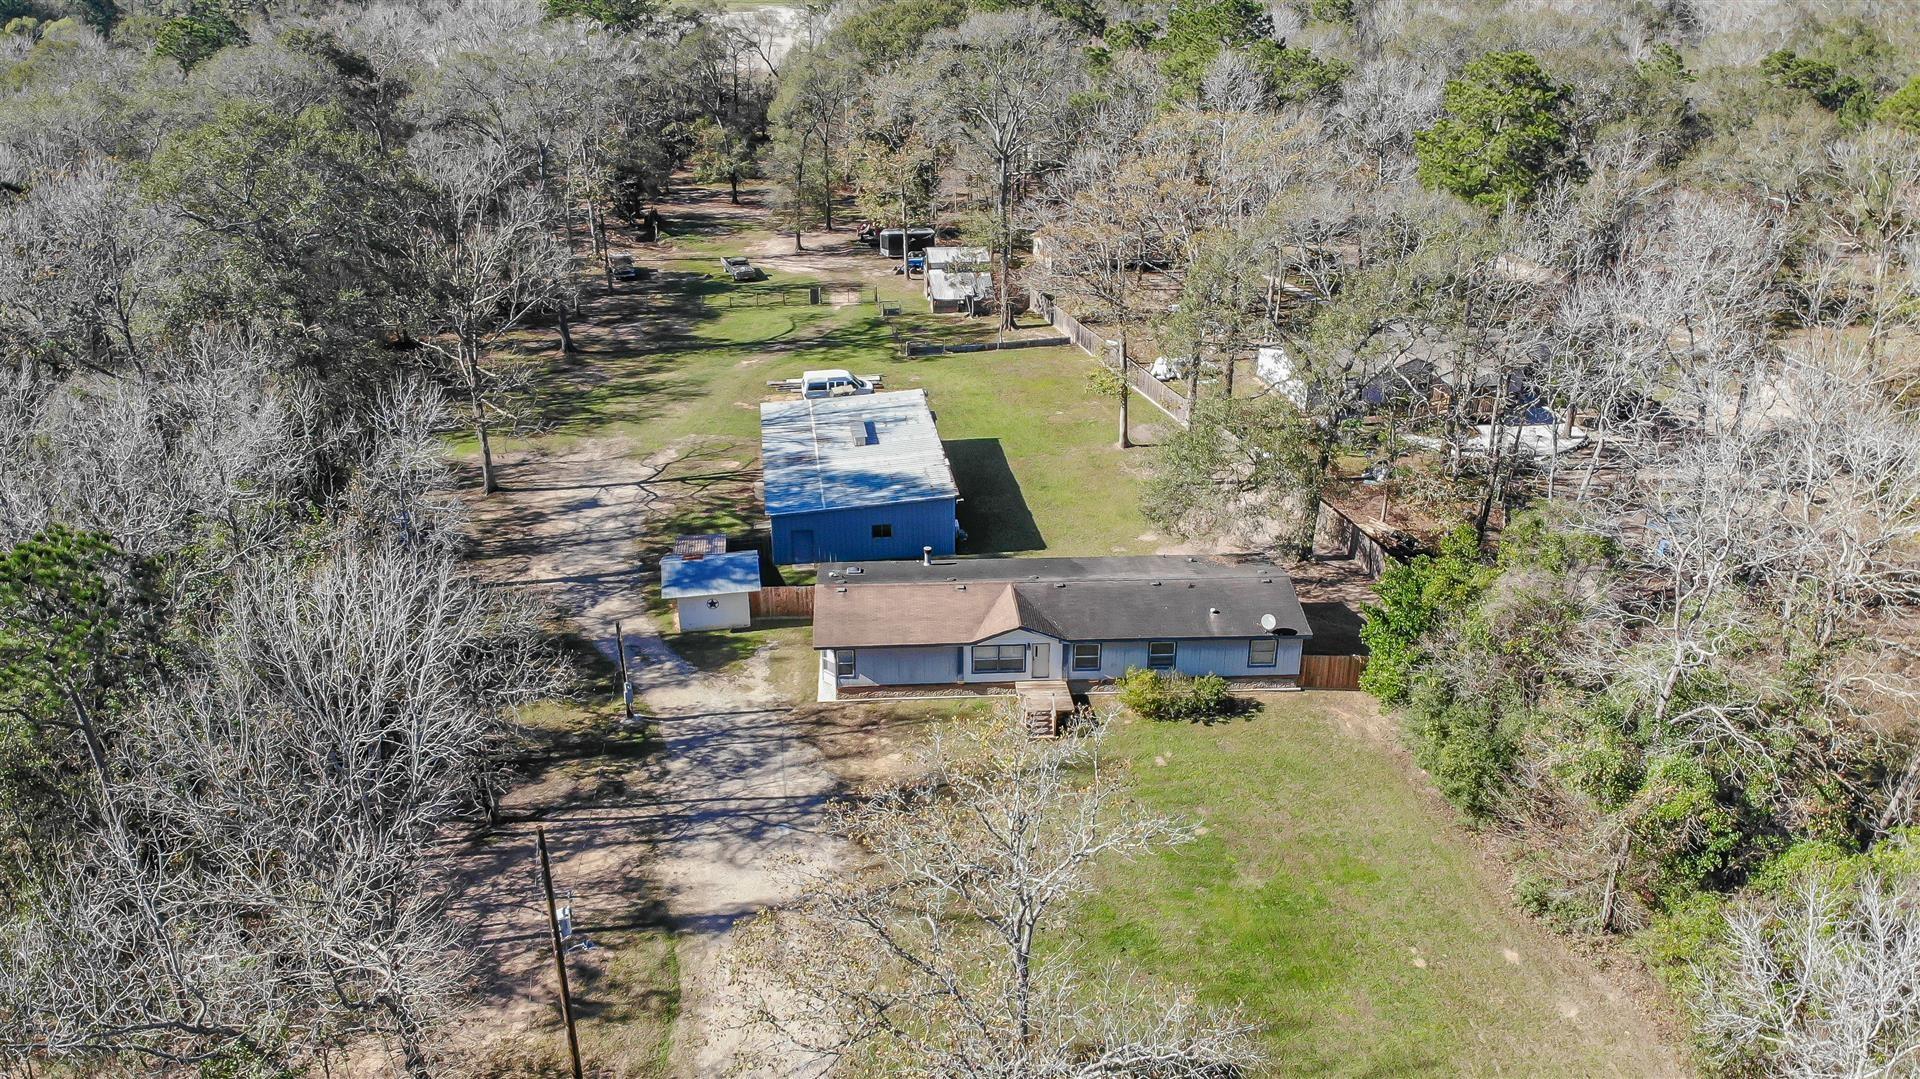 This property is listed at land/shop value only.  Here you can see the 4/2 mobile, well house and 30x60 shop. The 24x24 barn is located toward the back right. - If you have additional questions regarding 14840 Kyle Lane  in Conroe or would like to tour the property with us call 800-660-1022 and reference MLS# 54506033.